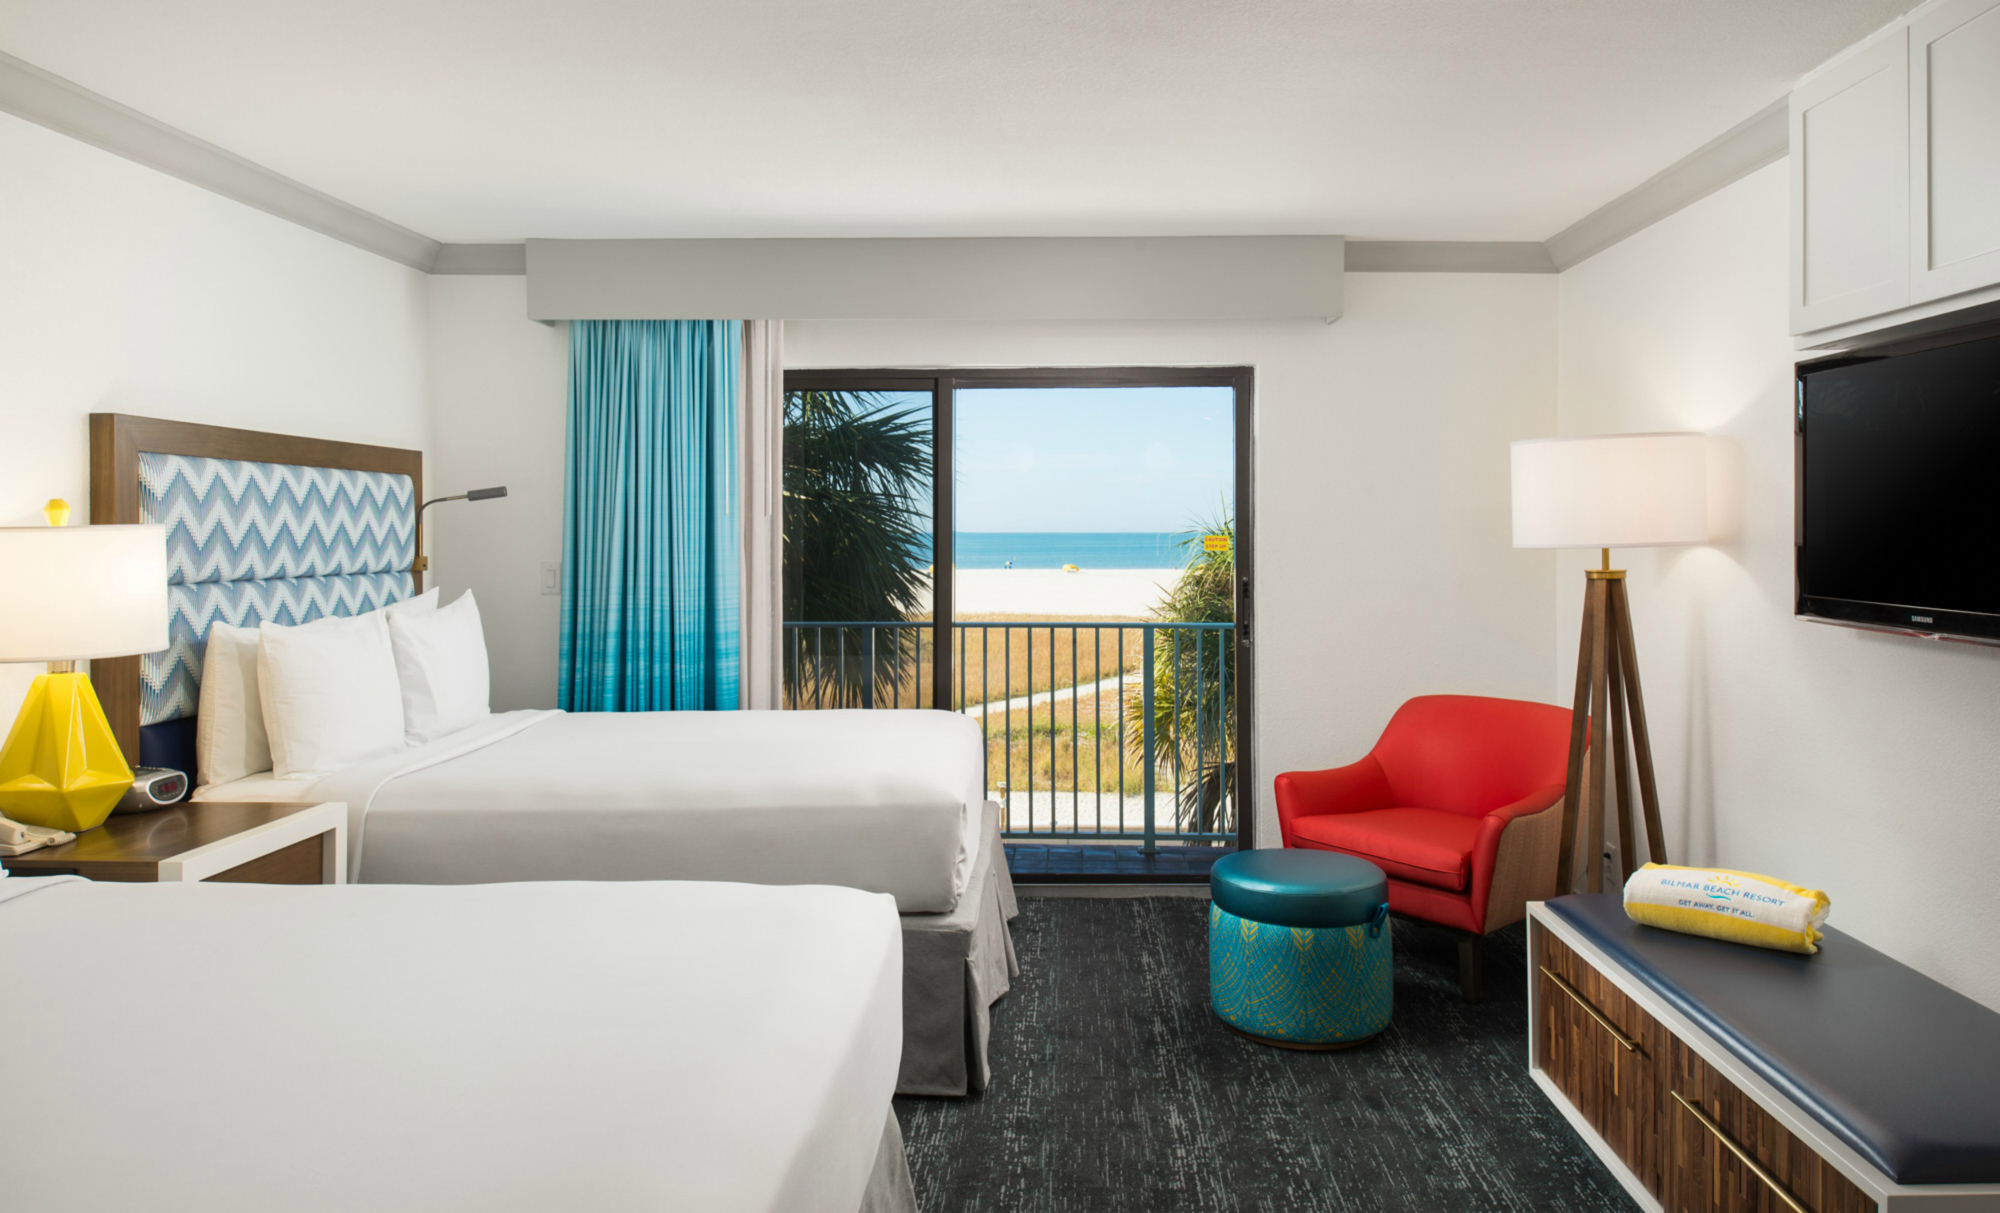 Bilmar Beach Resort's guest rooms have been extensively renovated. An average of $25,000 was spent on each room. Courtesy photo.